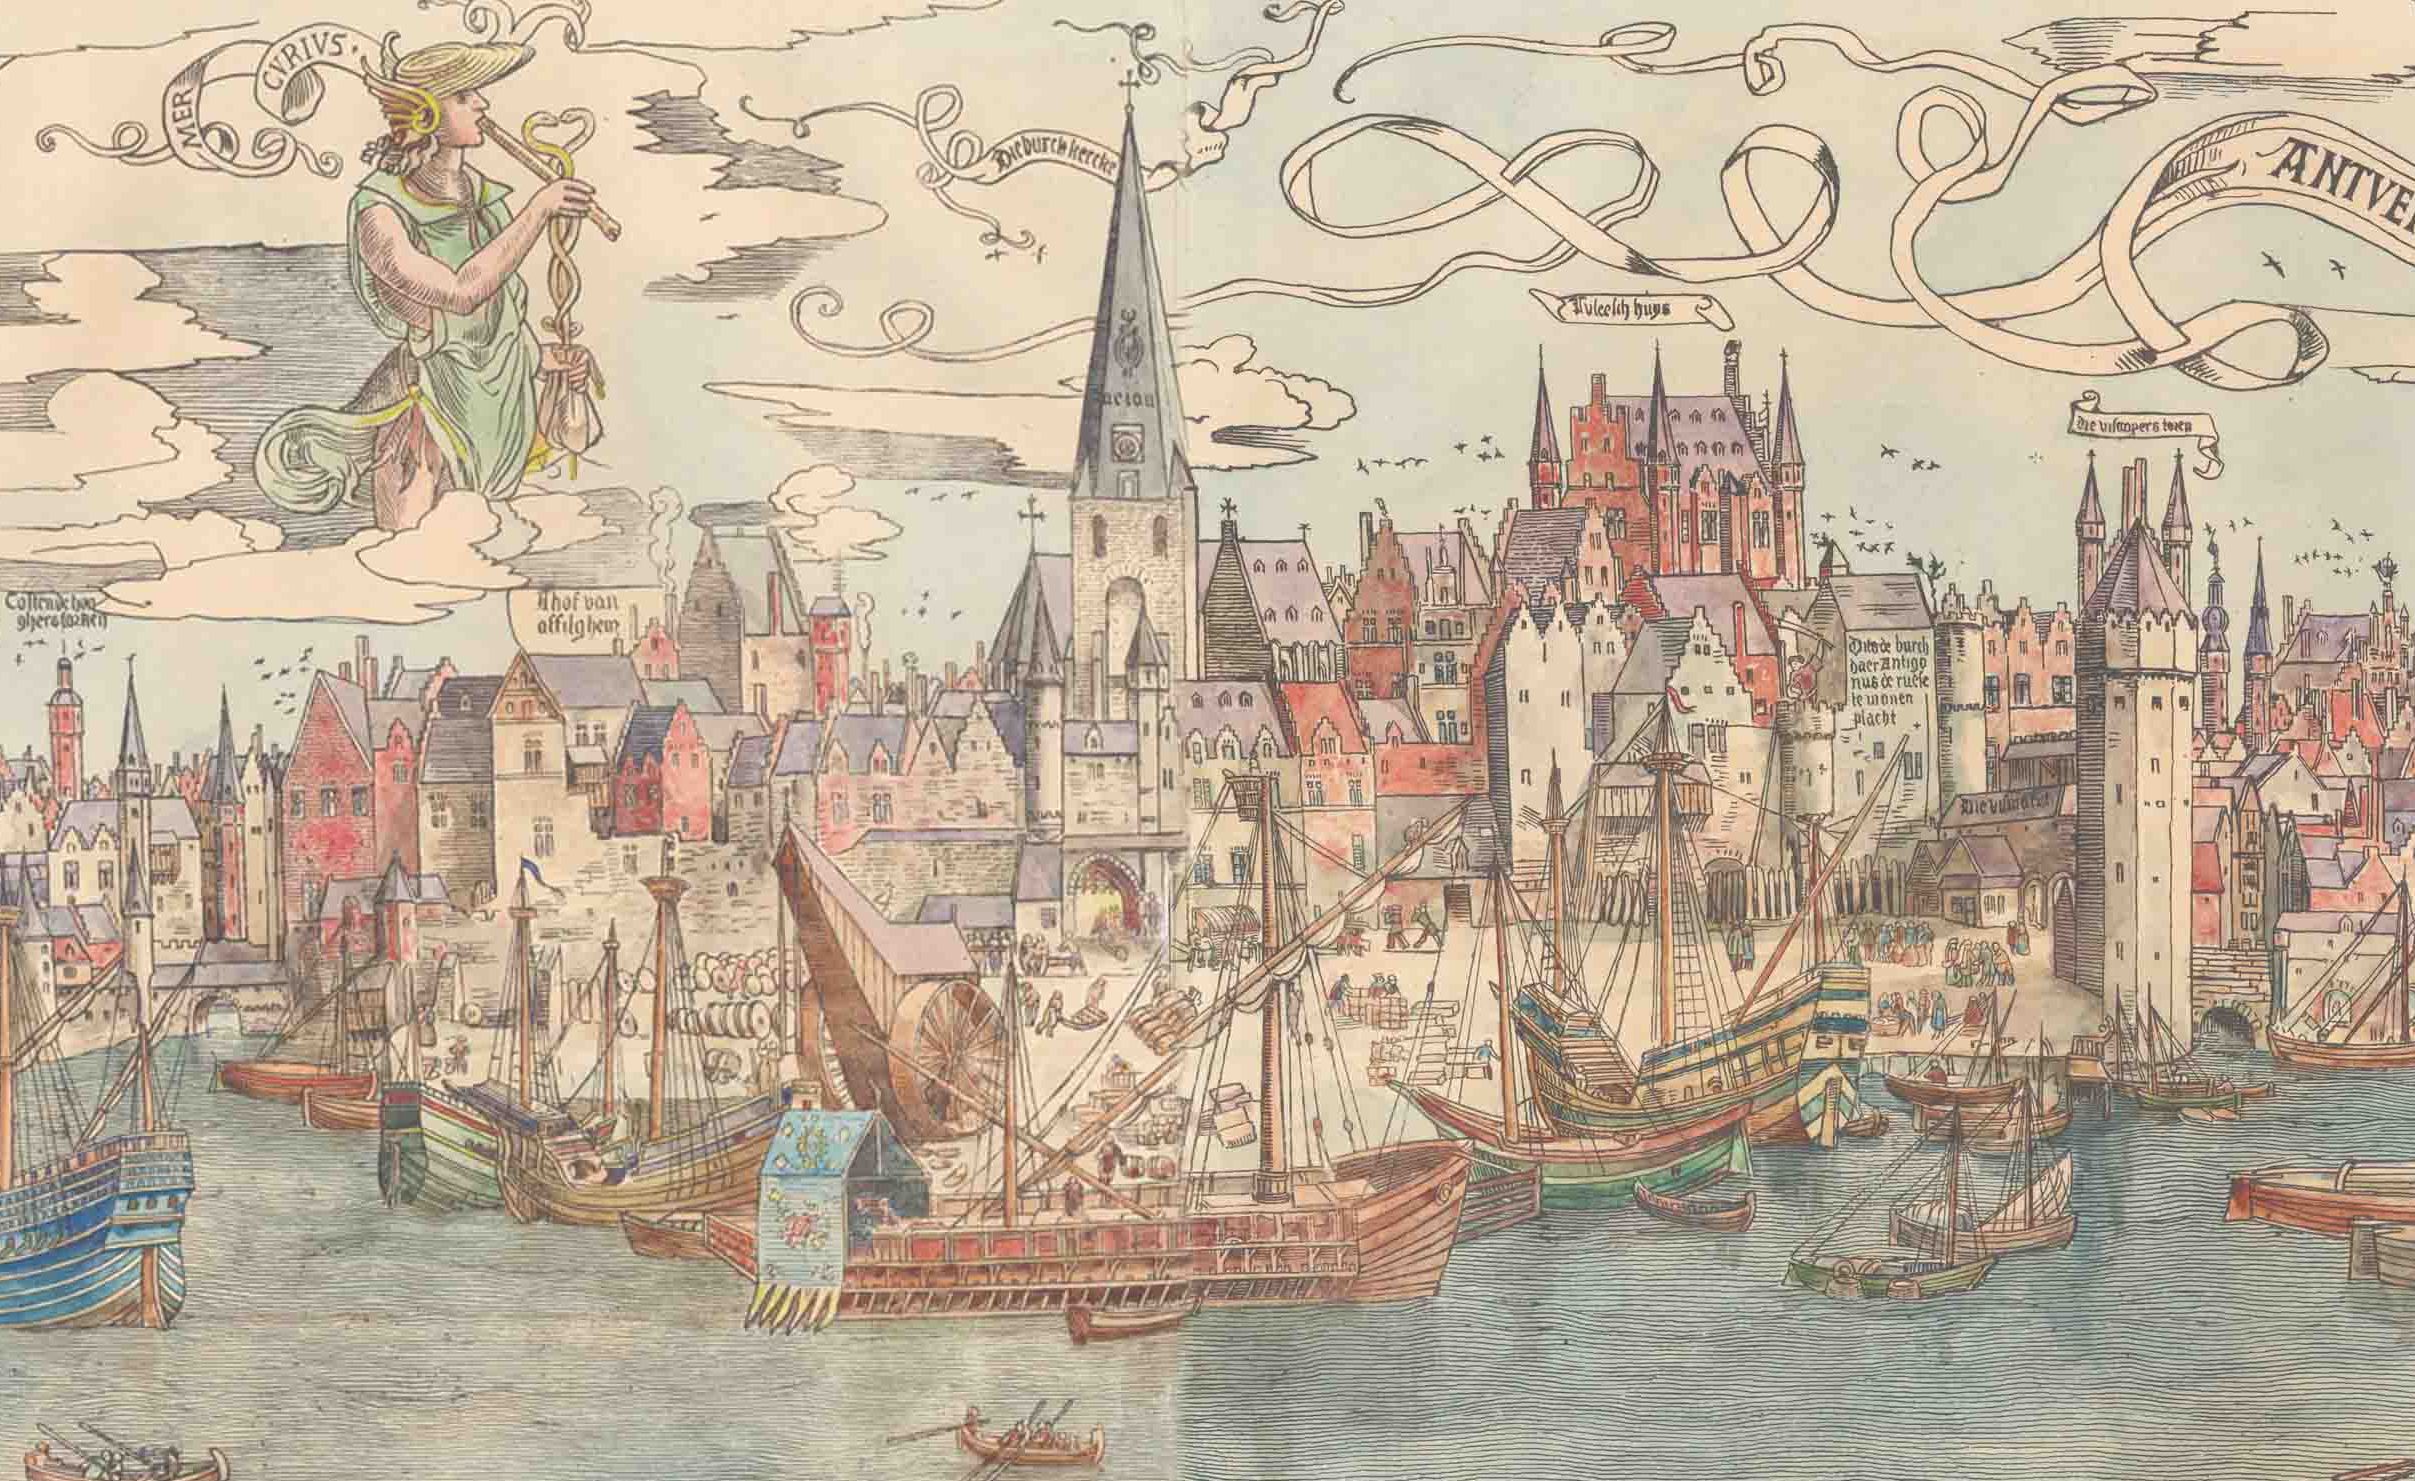 The wharf in a sixteenth-century painting of the Scheldt quays